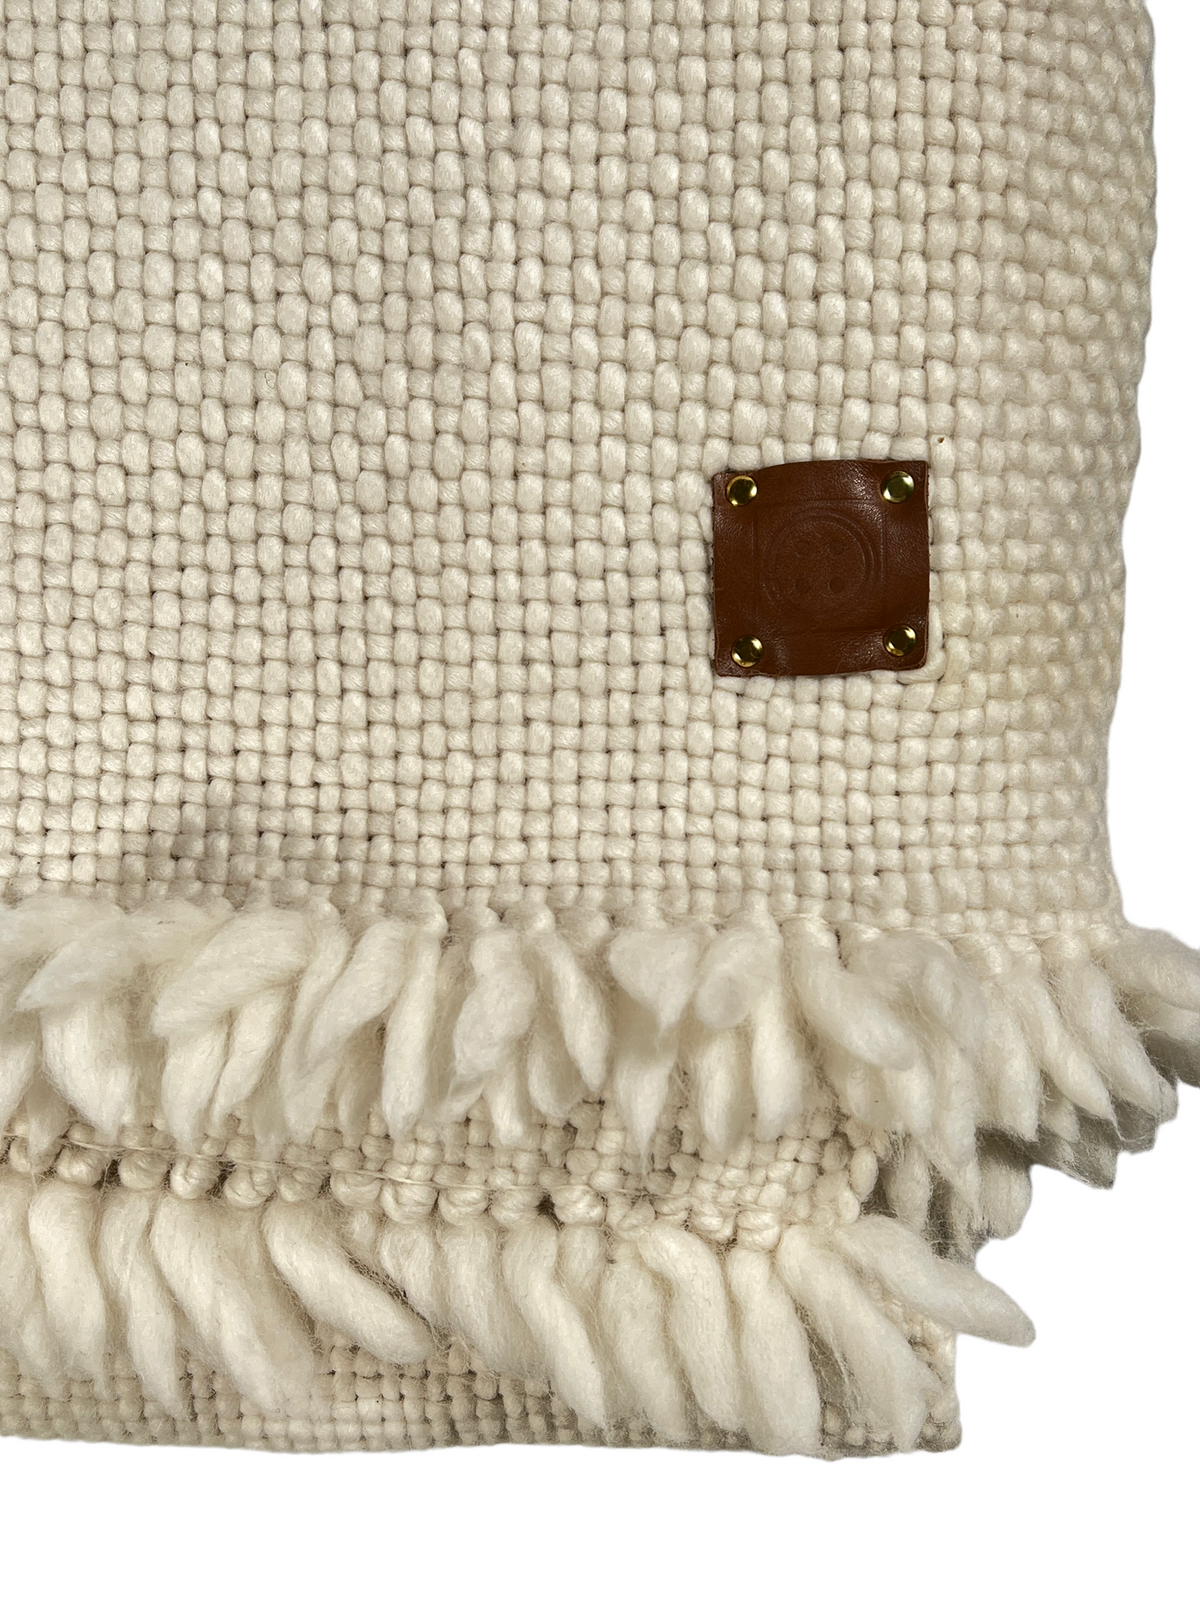 BUTTON DOWN HIGHLANDS MERINO WOOL KNIT THROW - NATURAL